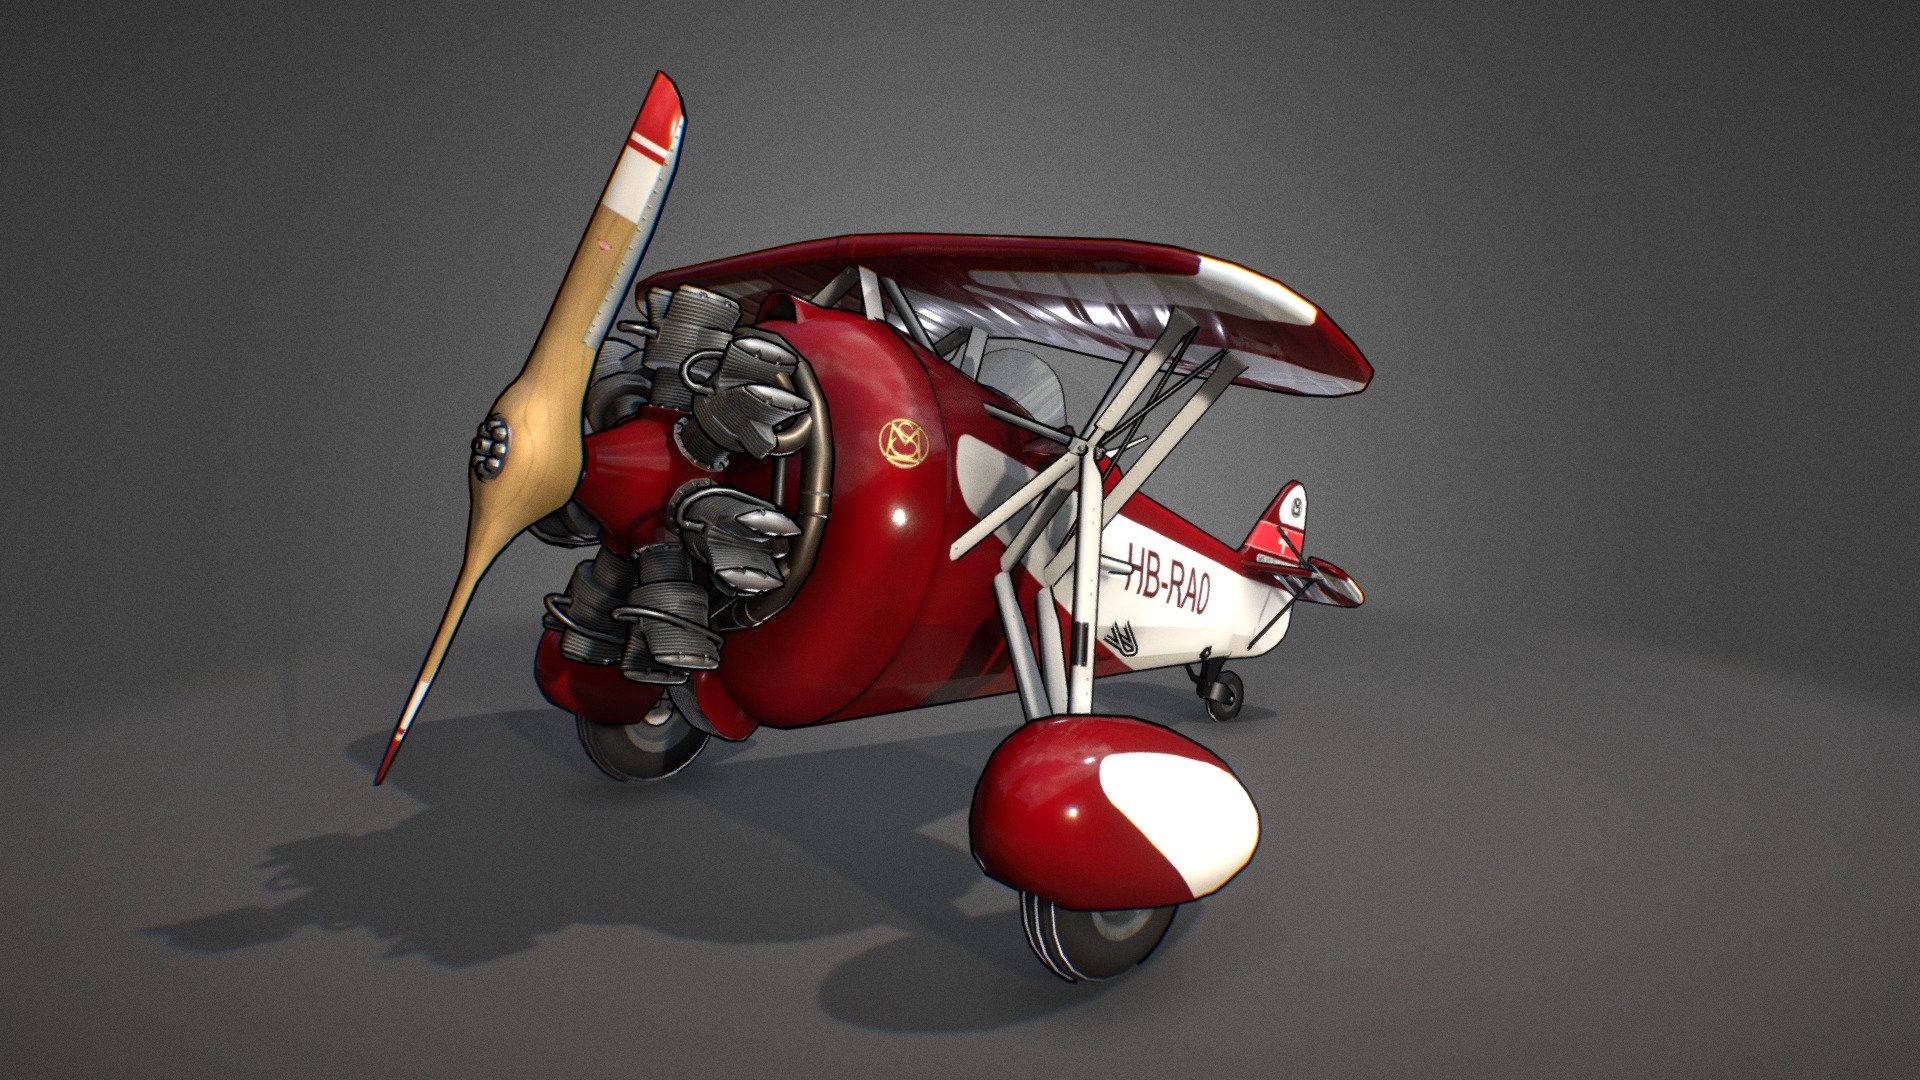 A small personnal project I really enjoyed working on!
It was fun to blend realistic and cartoonish style.
Plane Tris : 21529 - MS 317 - Download Free 3D model by MaximePages (@pagesm) 3d model